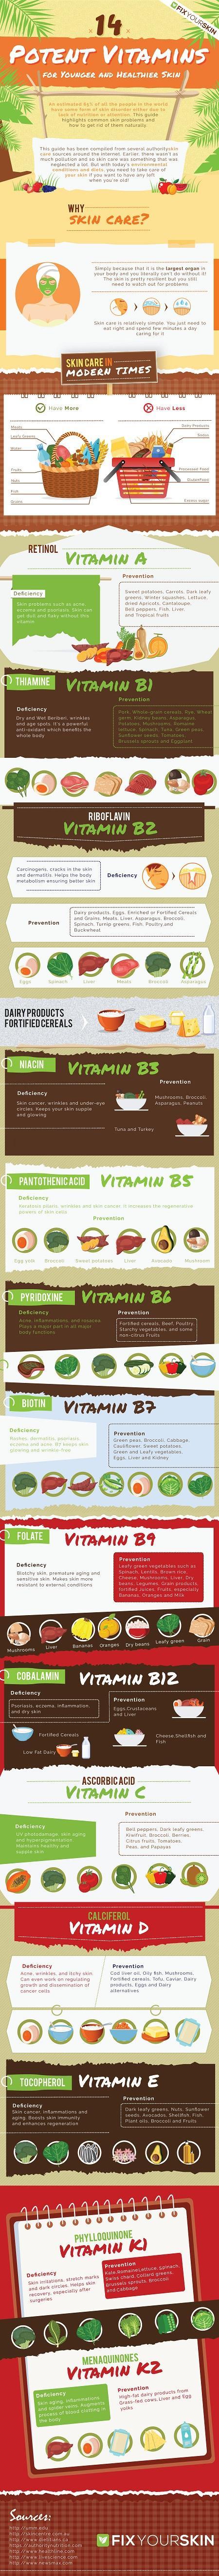 14 potent vitamins-for younger and healthier skin